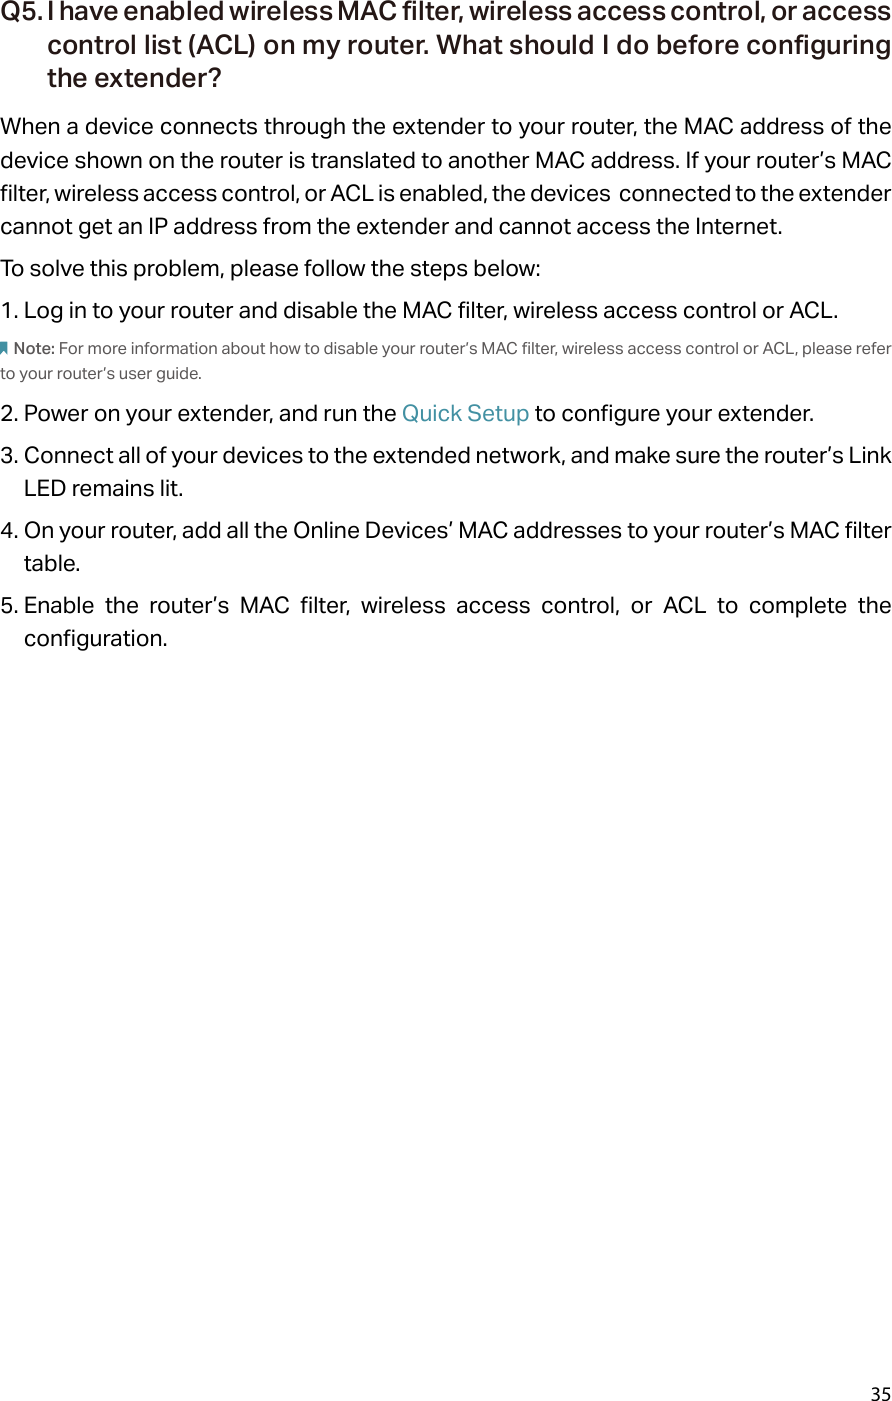 35Q5. I have enabled wireless MAC filter, wireless access control, or access control list (ACL) on my router. What should I do before configuring the extender?When a device connects through the extender to your router, the MAC address of the device shown on the router is translated to another MAC address. If your router’s MAC filter, wireless access control, or ACL is enabled, the devices  connected to the extender cannot get an IP address from the extender and cannot access the Internet.To solve this problem, please follow the steps below:1. Log in to your router and disable the MAC filter, wireless access control or ACL.Note: For more information about how to disable your router’s MAC filter, wireless access control or ACL, please refer to your router’s user guide.2. Power on your extender, and run the Quick Setup to configure your extender.3. Connect all of your devices to the extended network, and make sure the router’s Link LED remains lit.4. On your router, add all the Online Devices’ MAC addresses to your router’s MAC filter table.5. Enable the router’s MAC filter, wireless access control, or ACL to complete the configuration. 